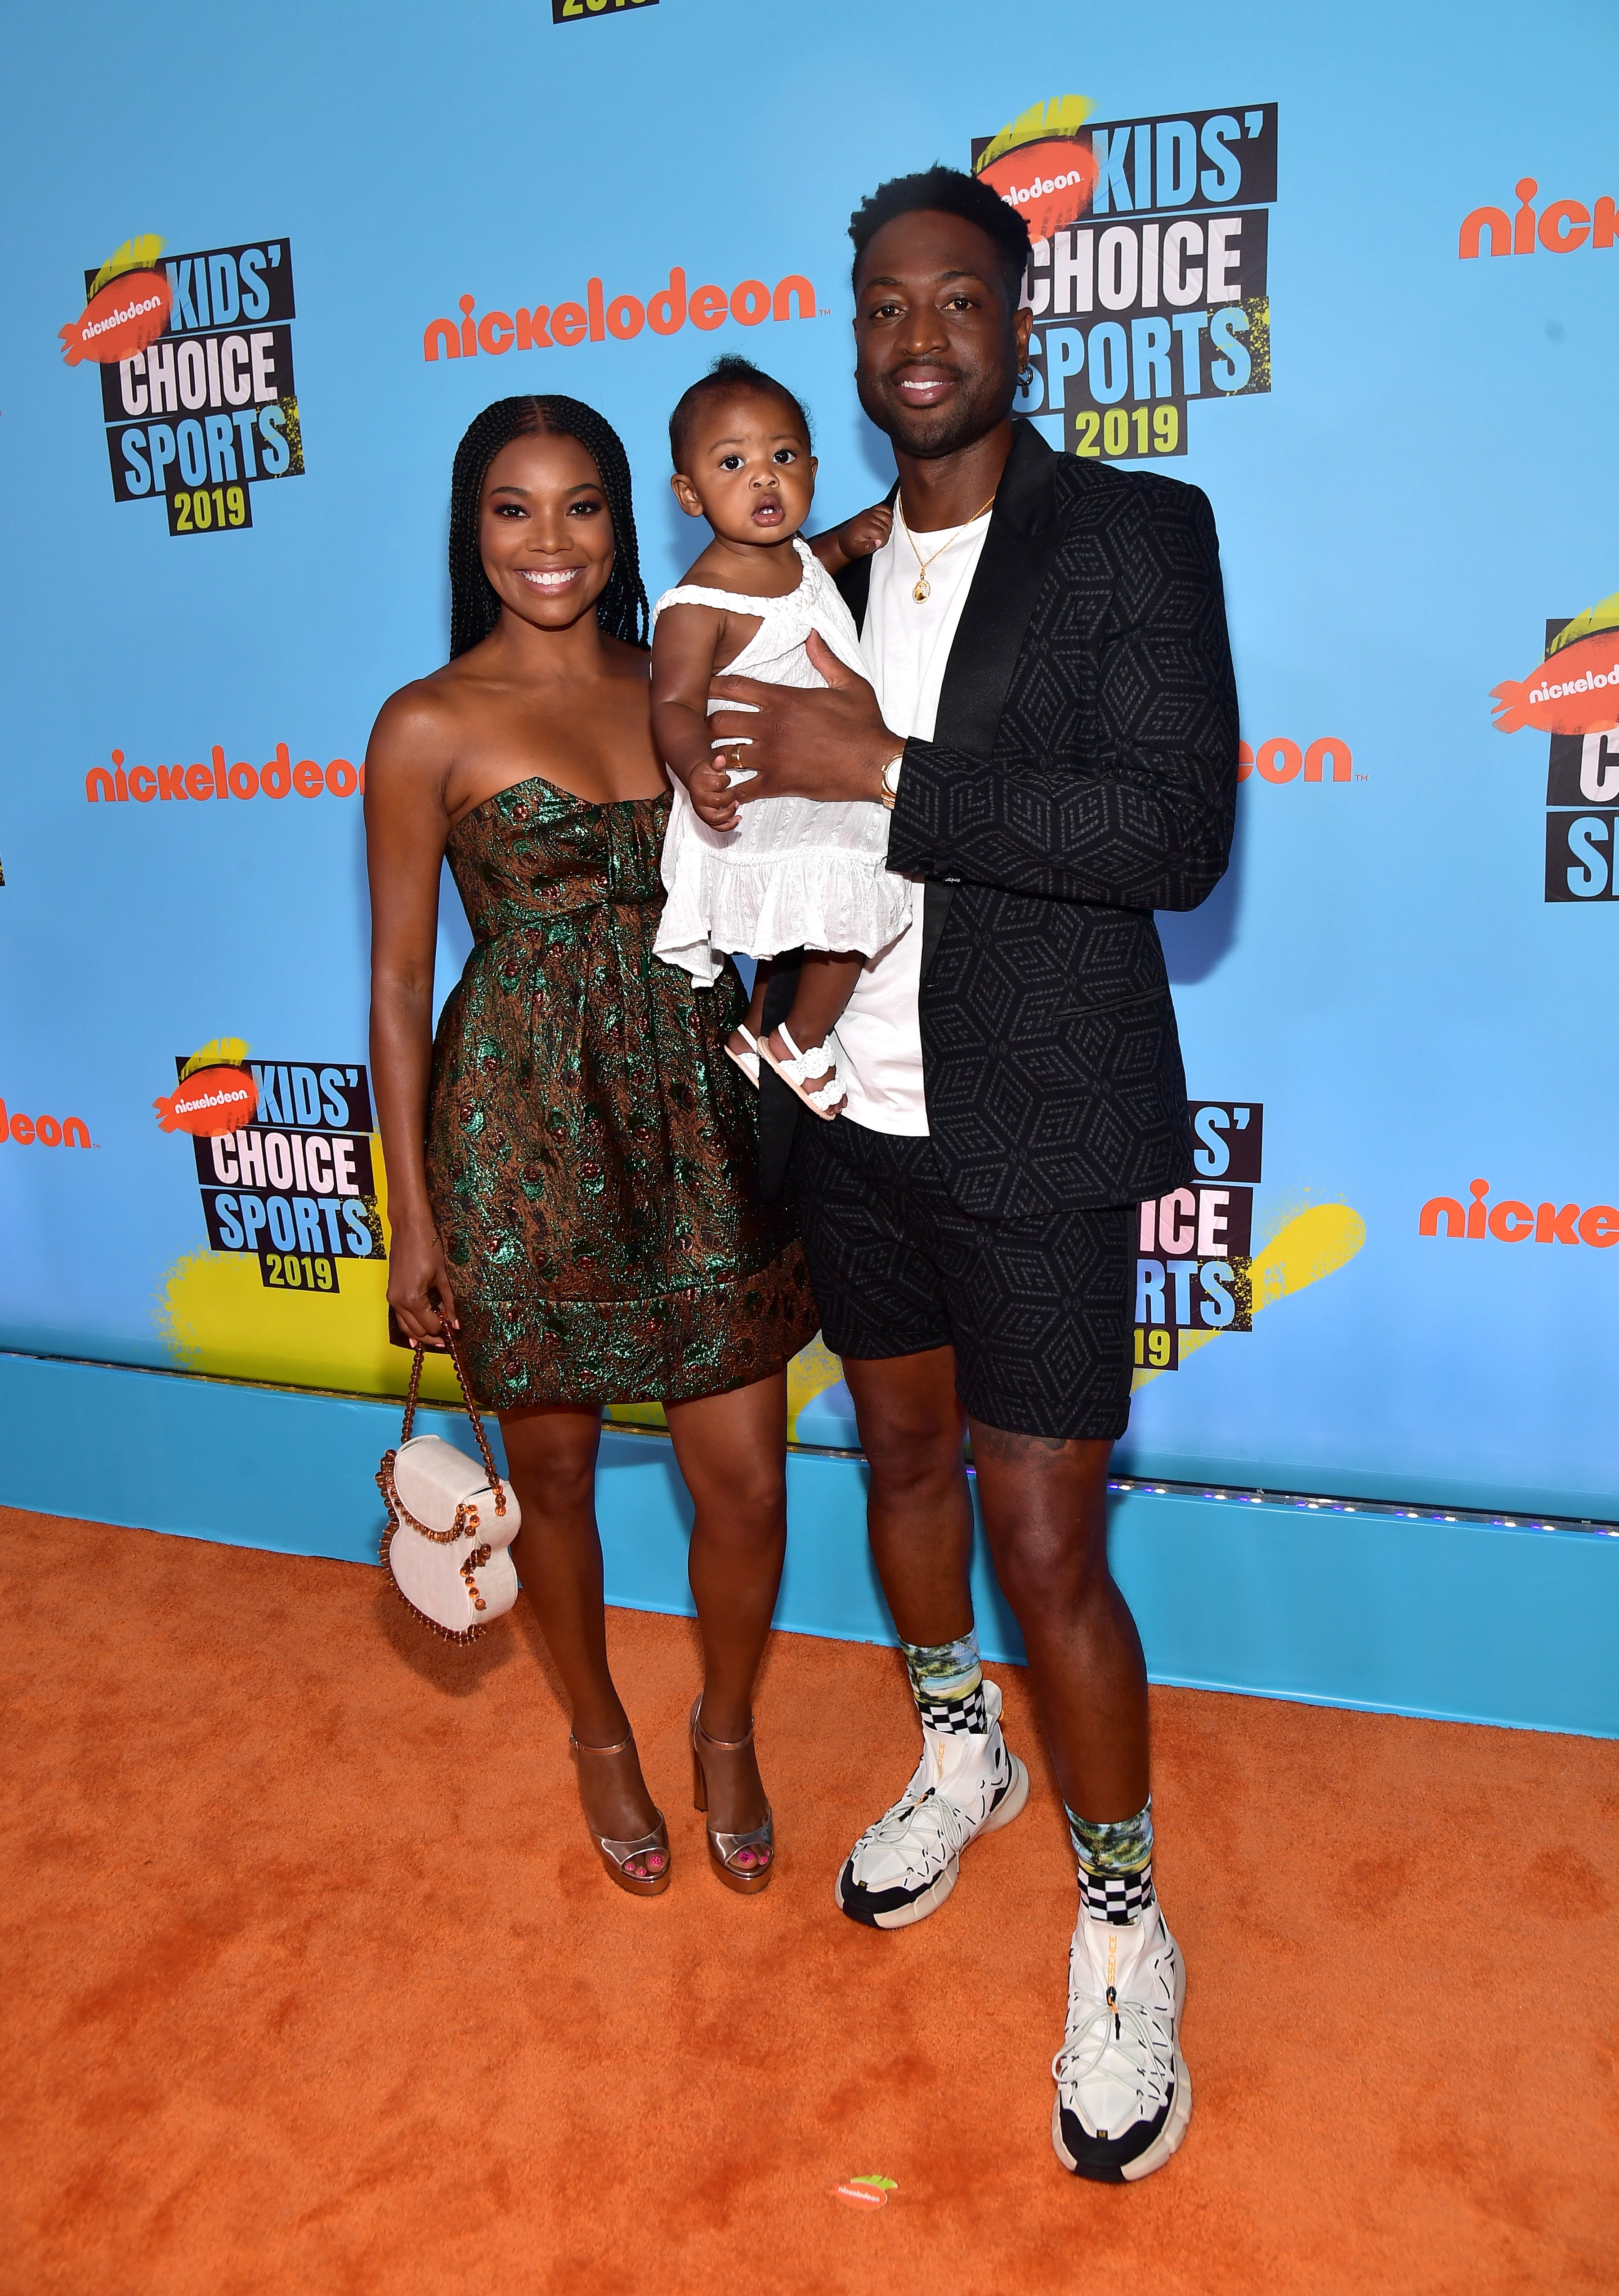 Gabrielle Union And Dwyane Wade S Adorable Daughter Kaavia Makes Her Red Carpet Debut See The Cute Pics Entertainment Tonight